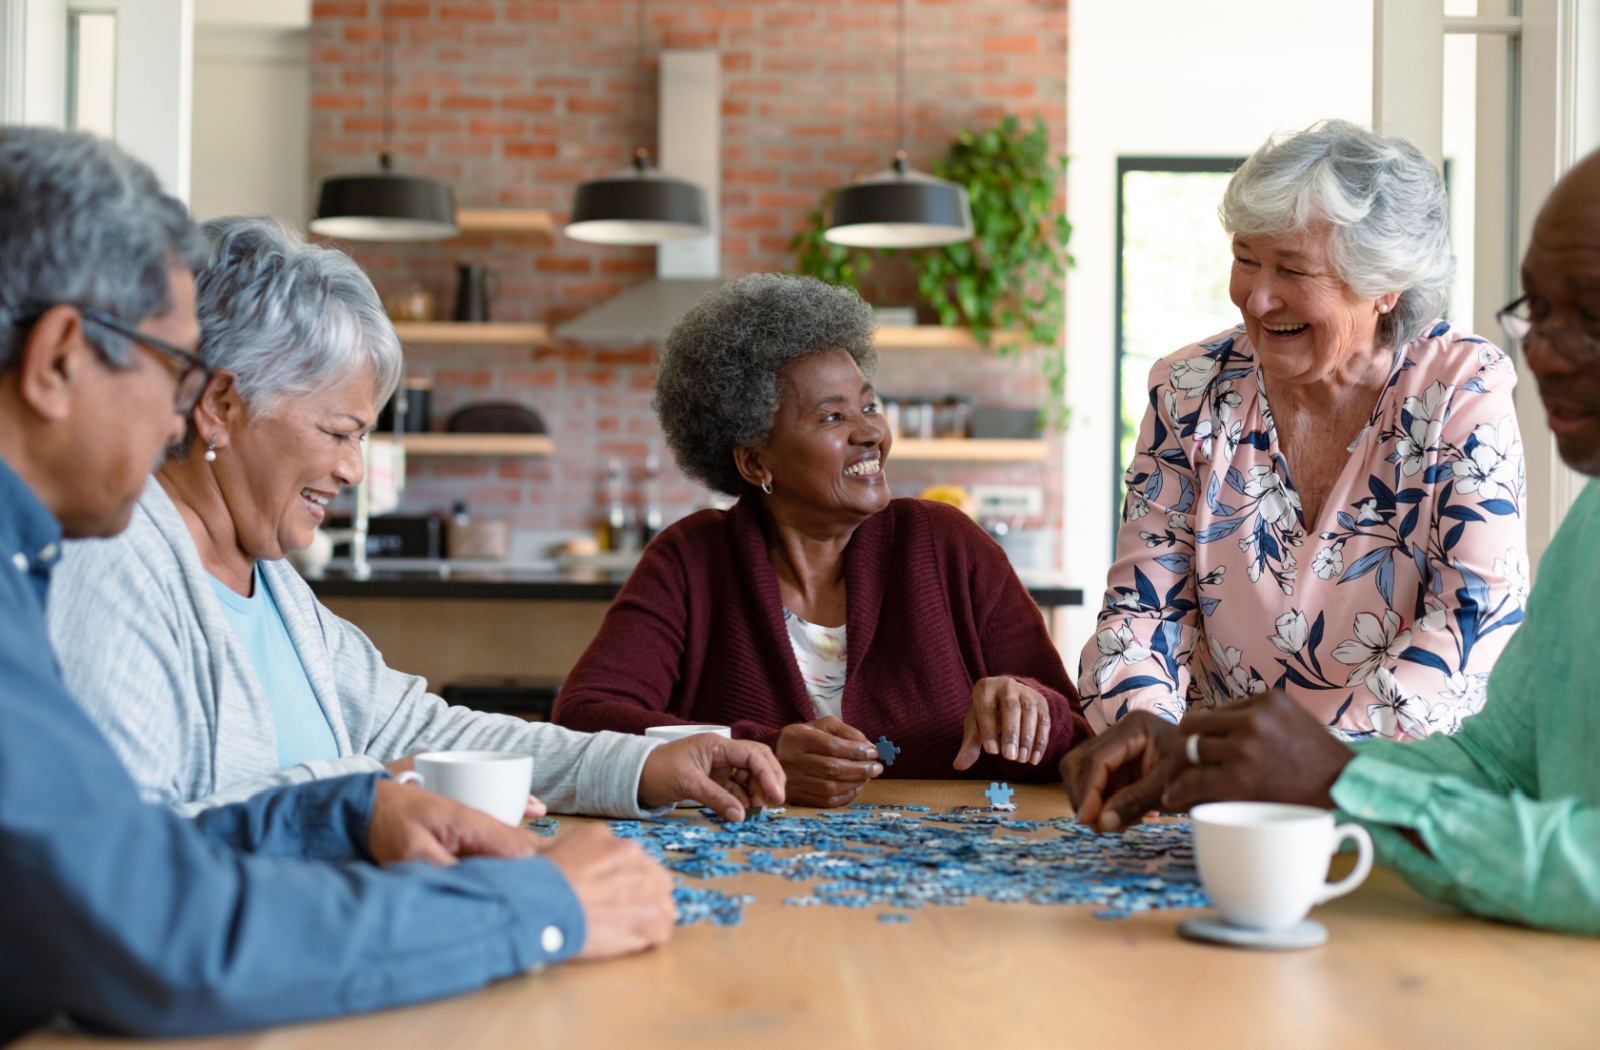 A group of 5 seniors sit at a table drinking coffee while building a puzzle
